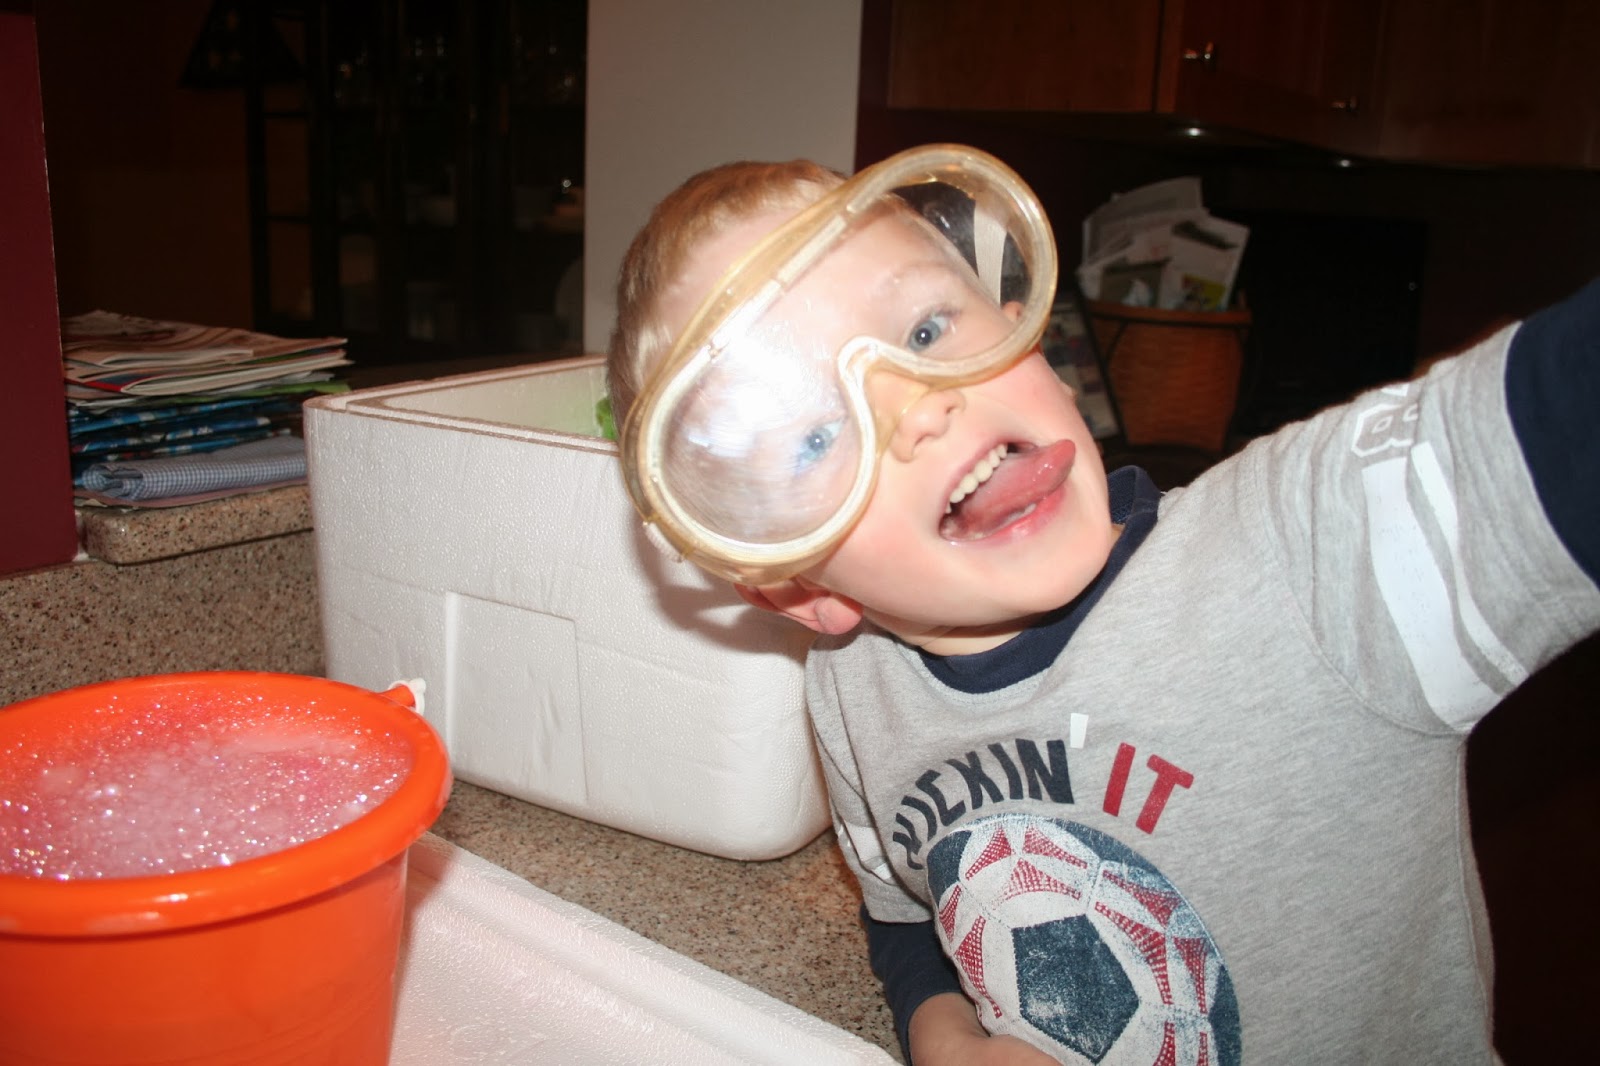 NOVA Frugal Family: Thrifty Thursday: Dry Ice Science Experiment for Free